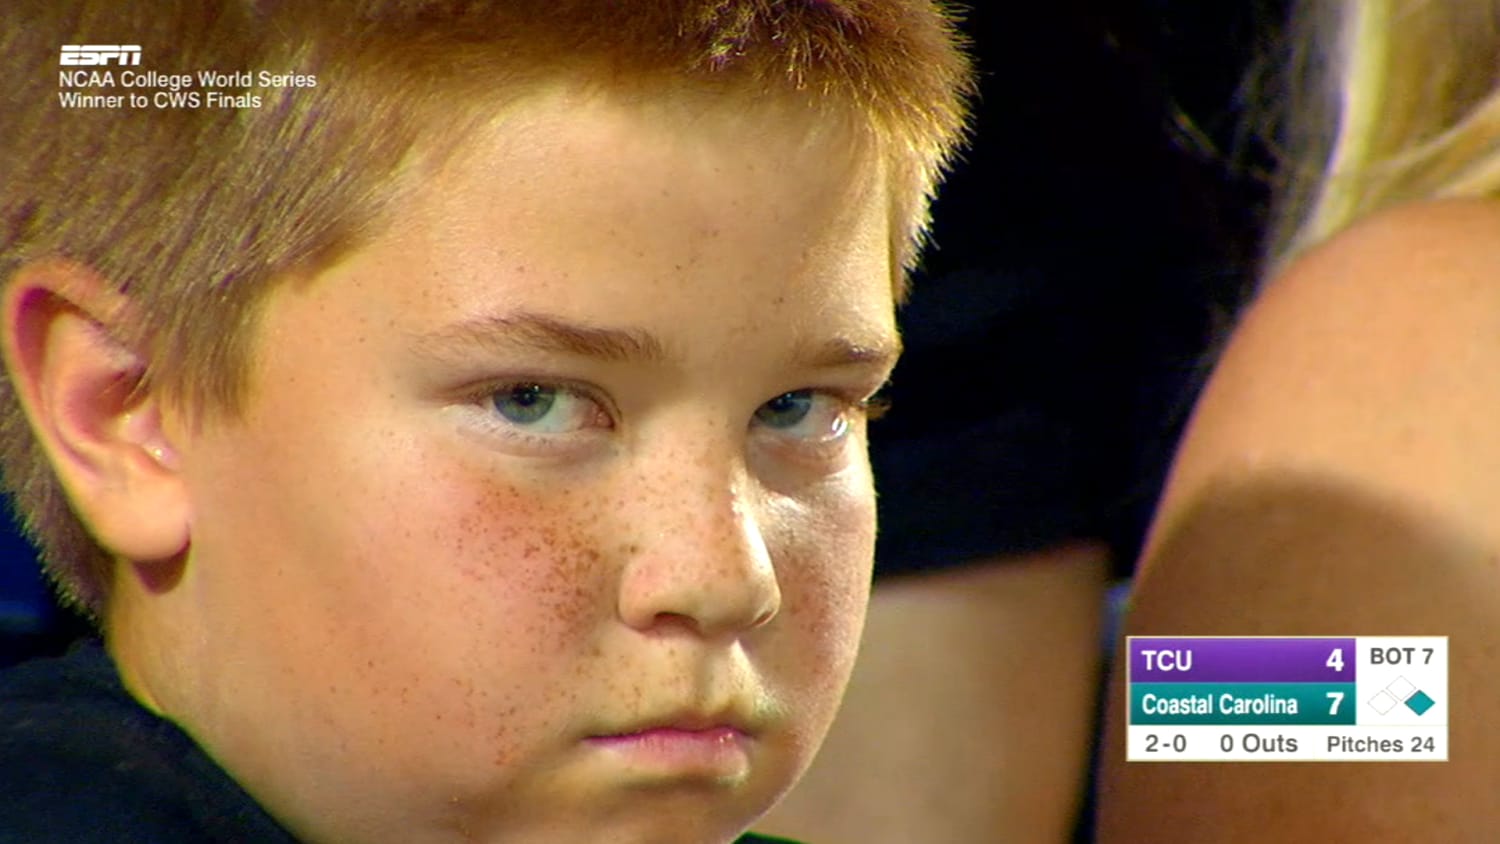 Kid's epic death stare steals the show at baseball game - TODAY.com